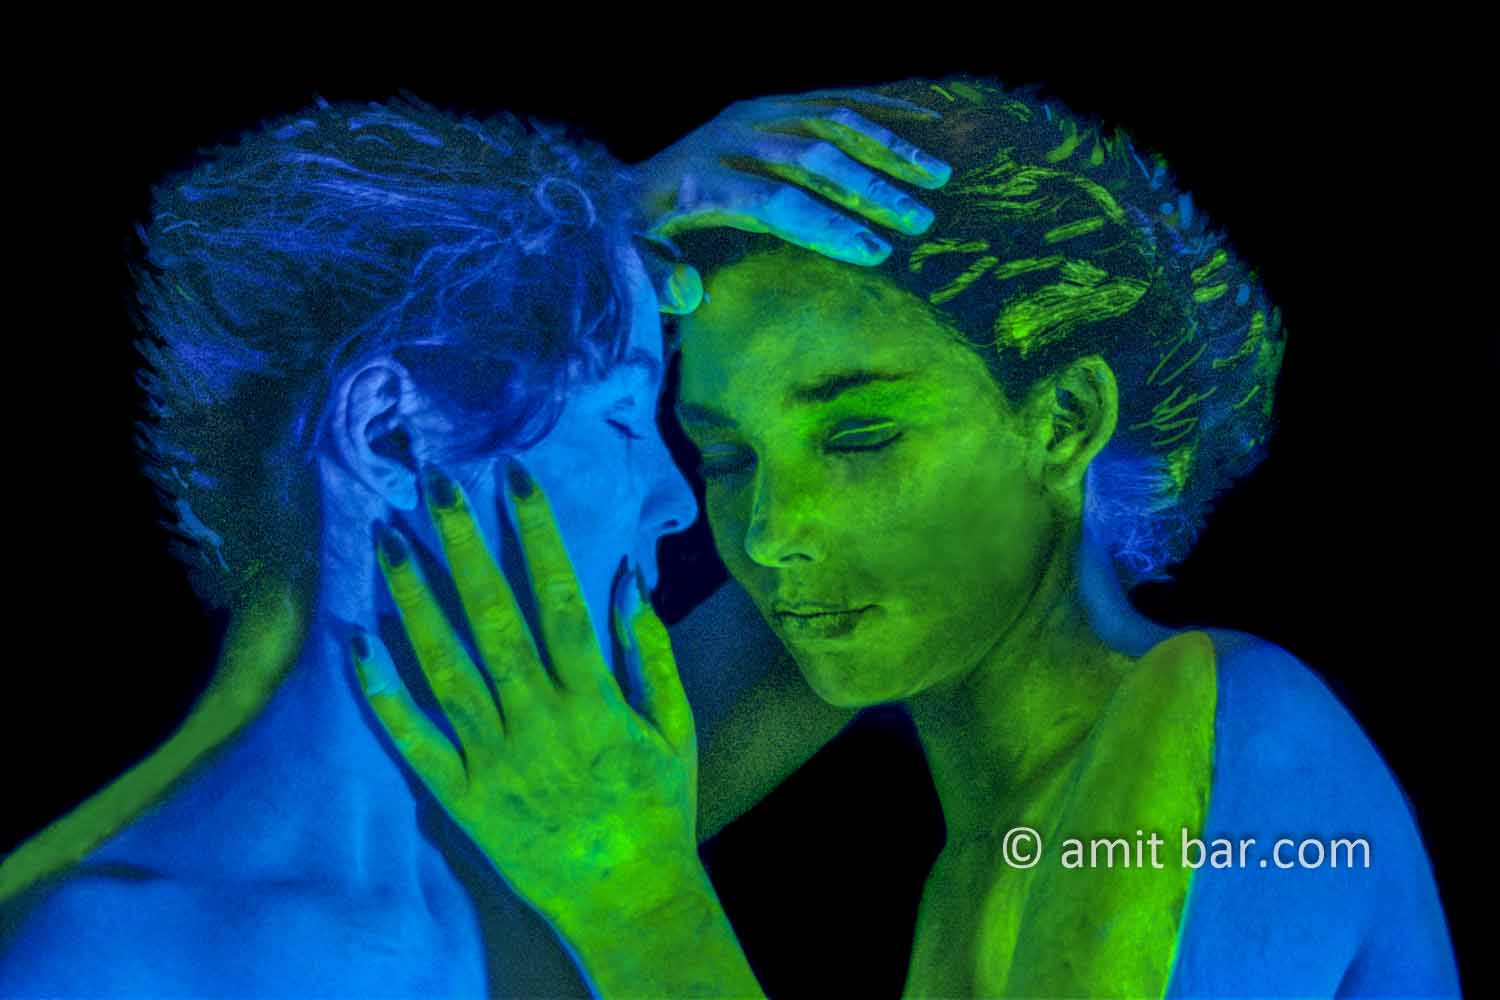 Blue and green III: Two body-painted models in UV blue and green